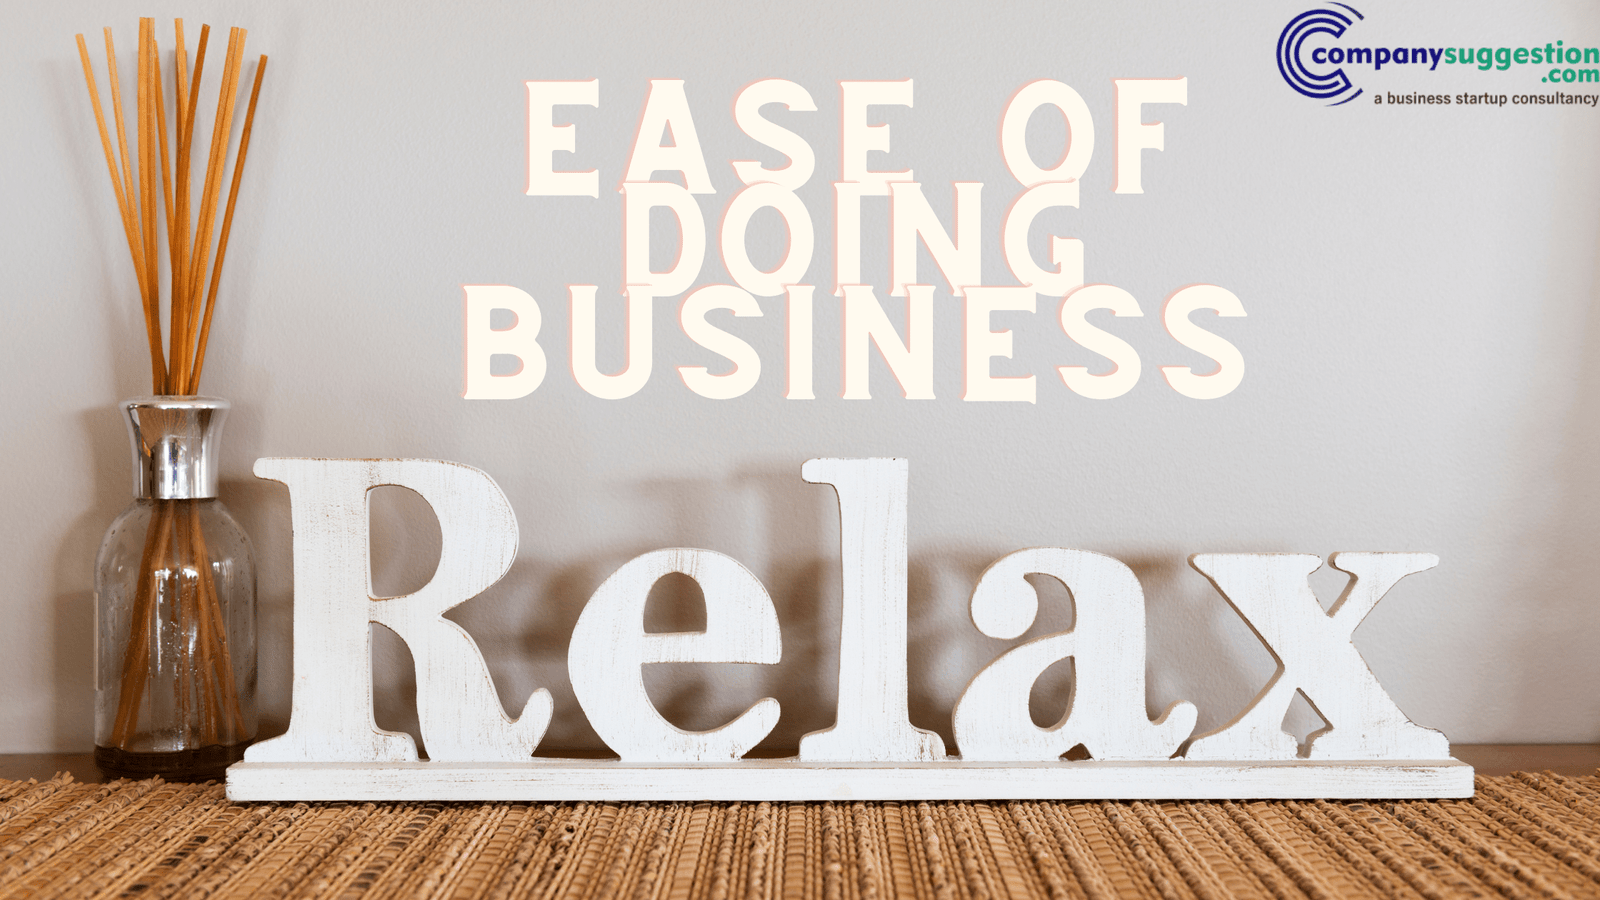 EASE OF DOING BUSINESS